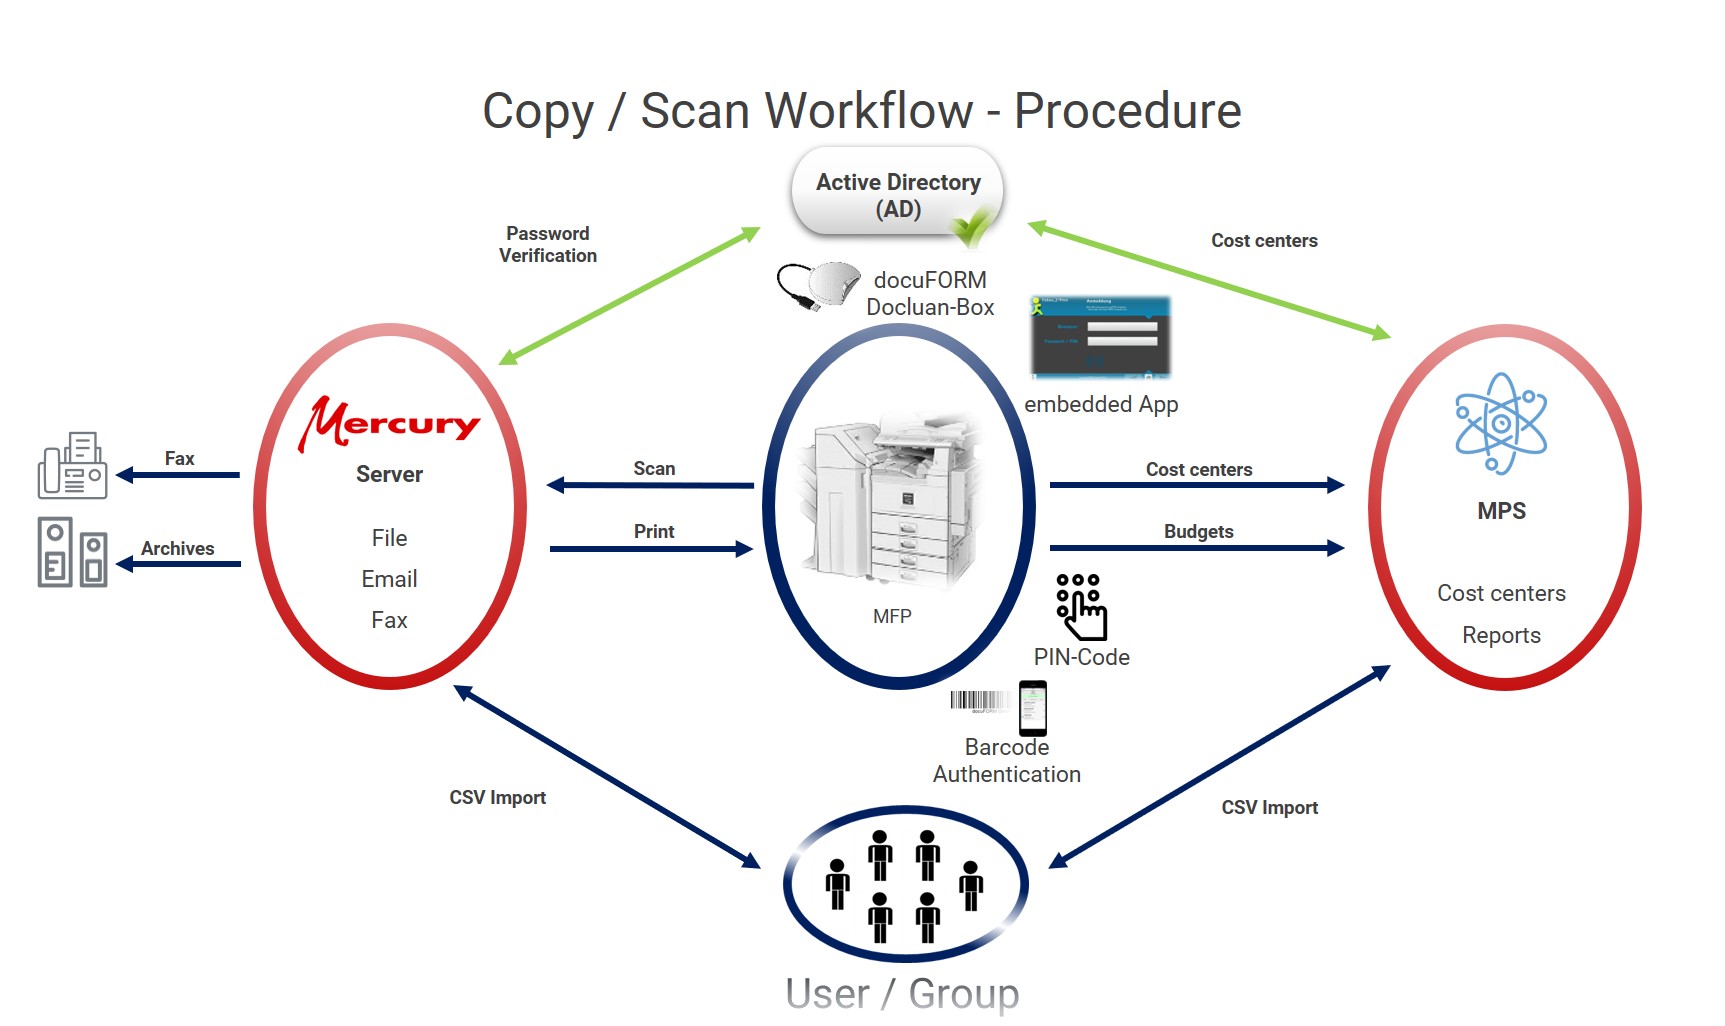 The copy and scan workflow